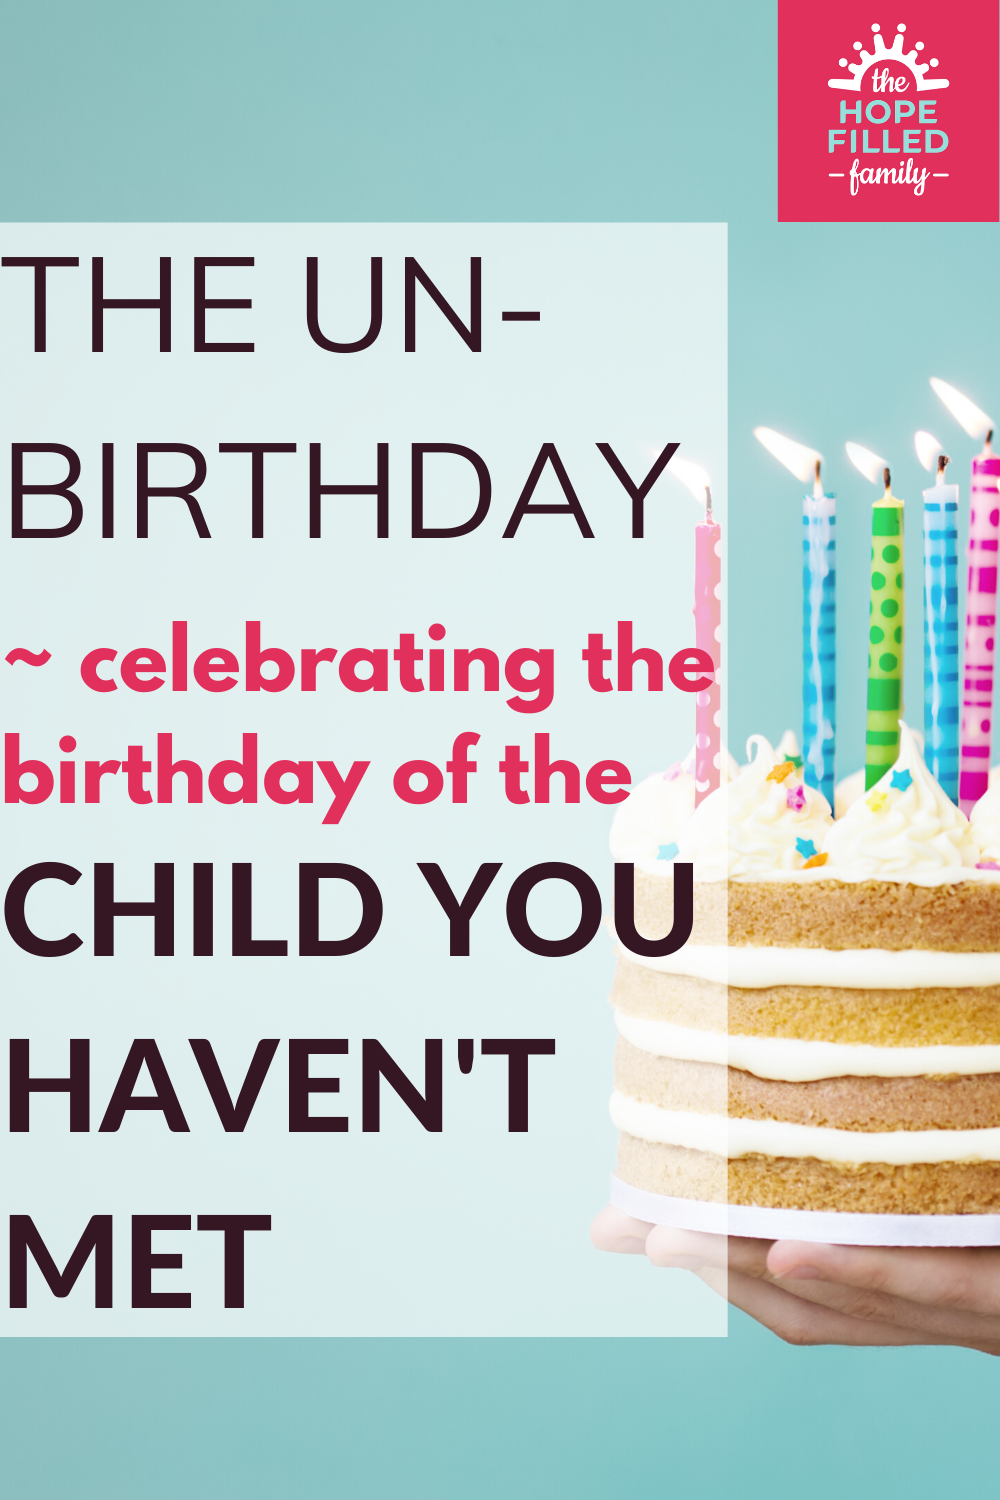 The strangeness of knowing that your child experienced birthdays before you met them.